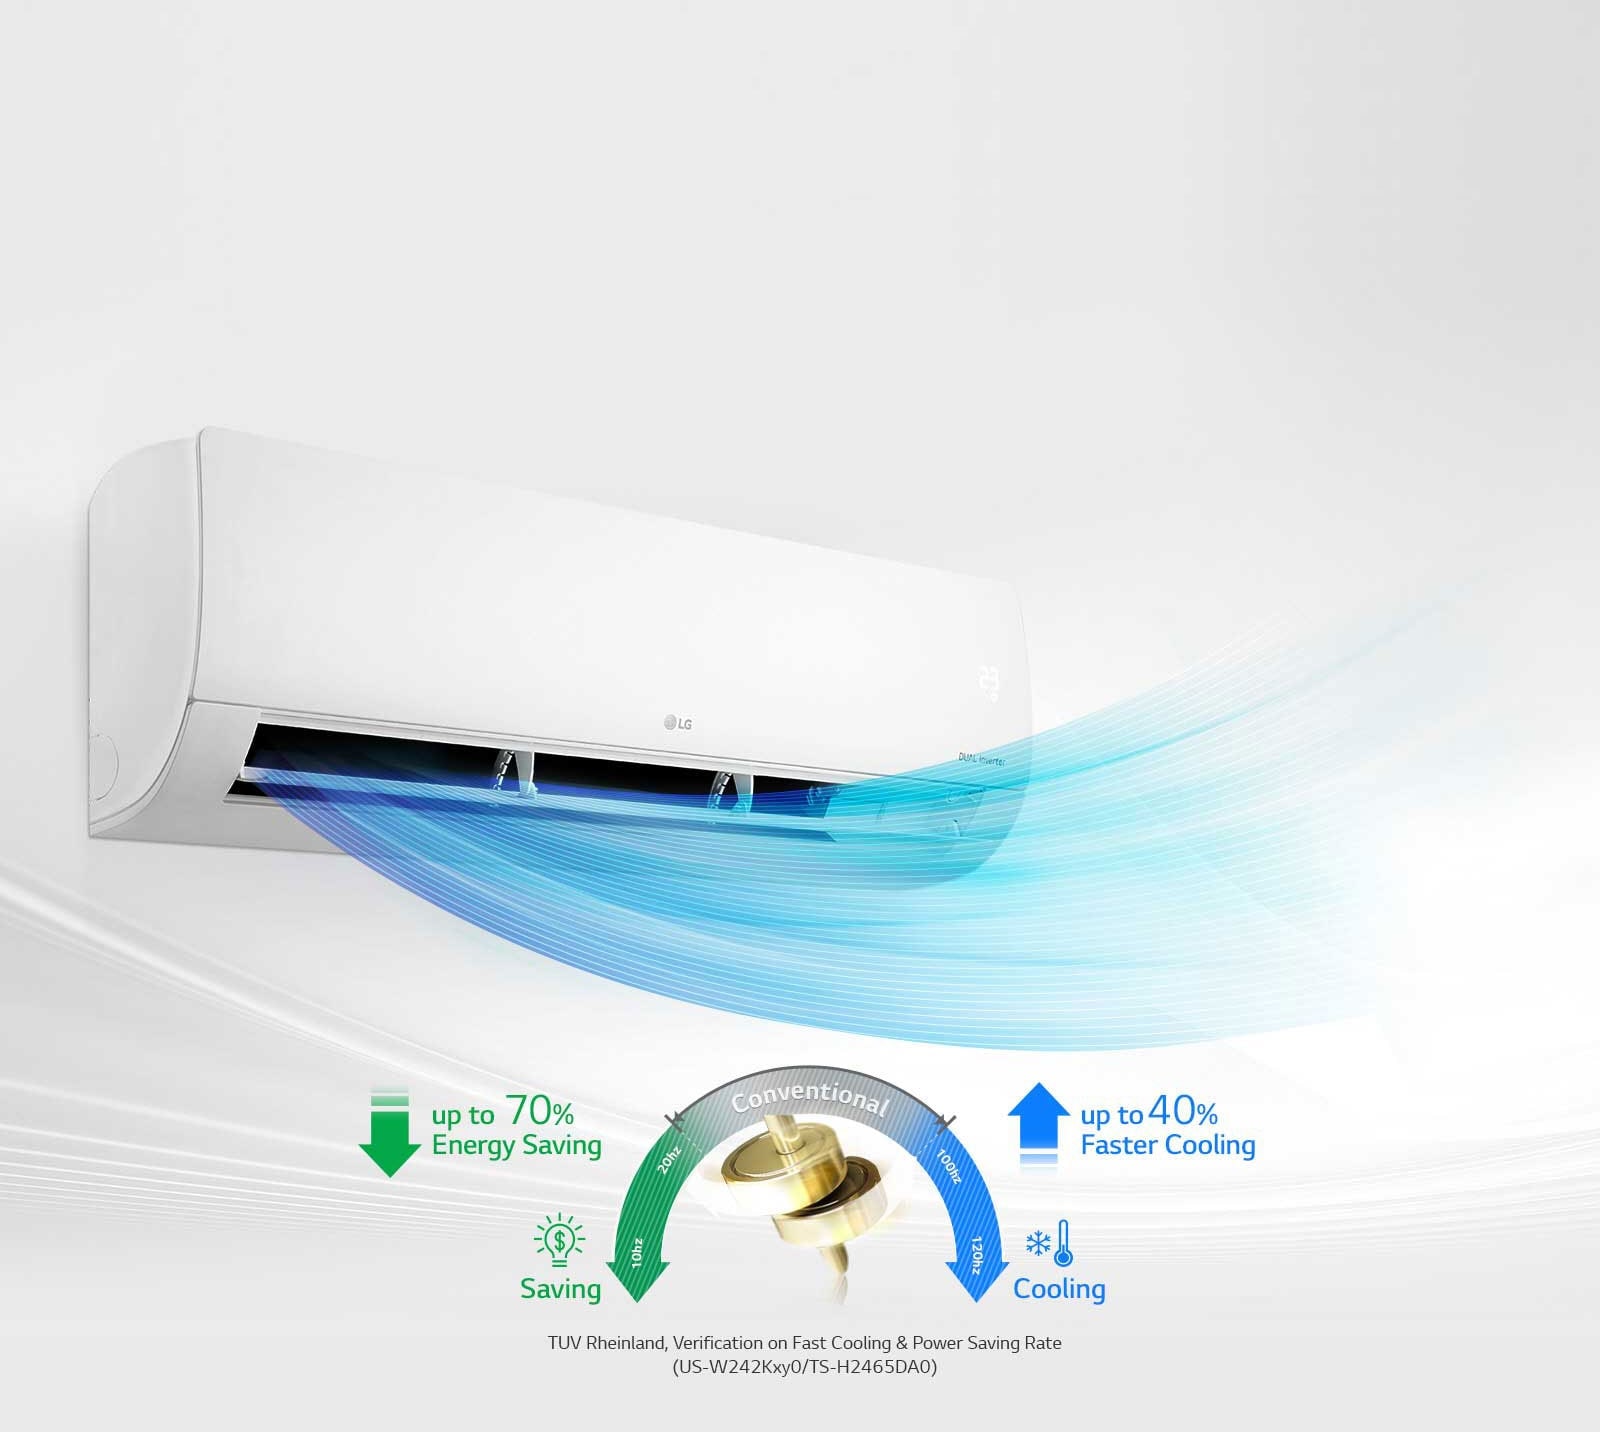 Fast Cooling & Energy Saving